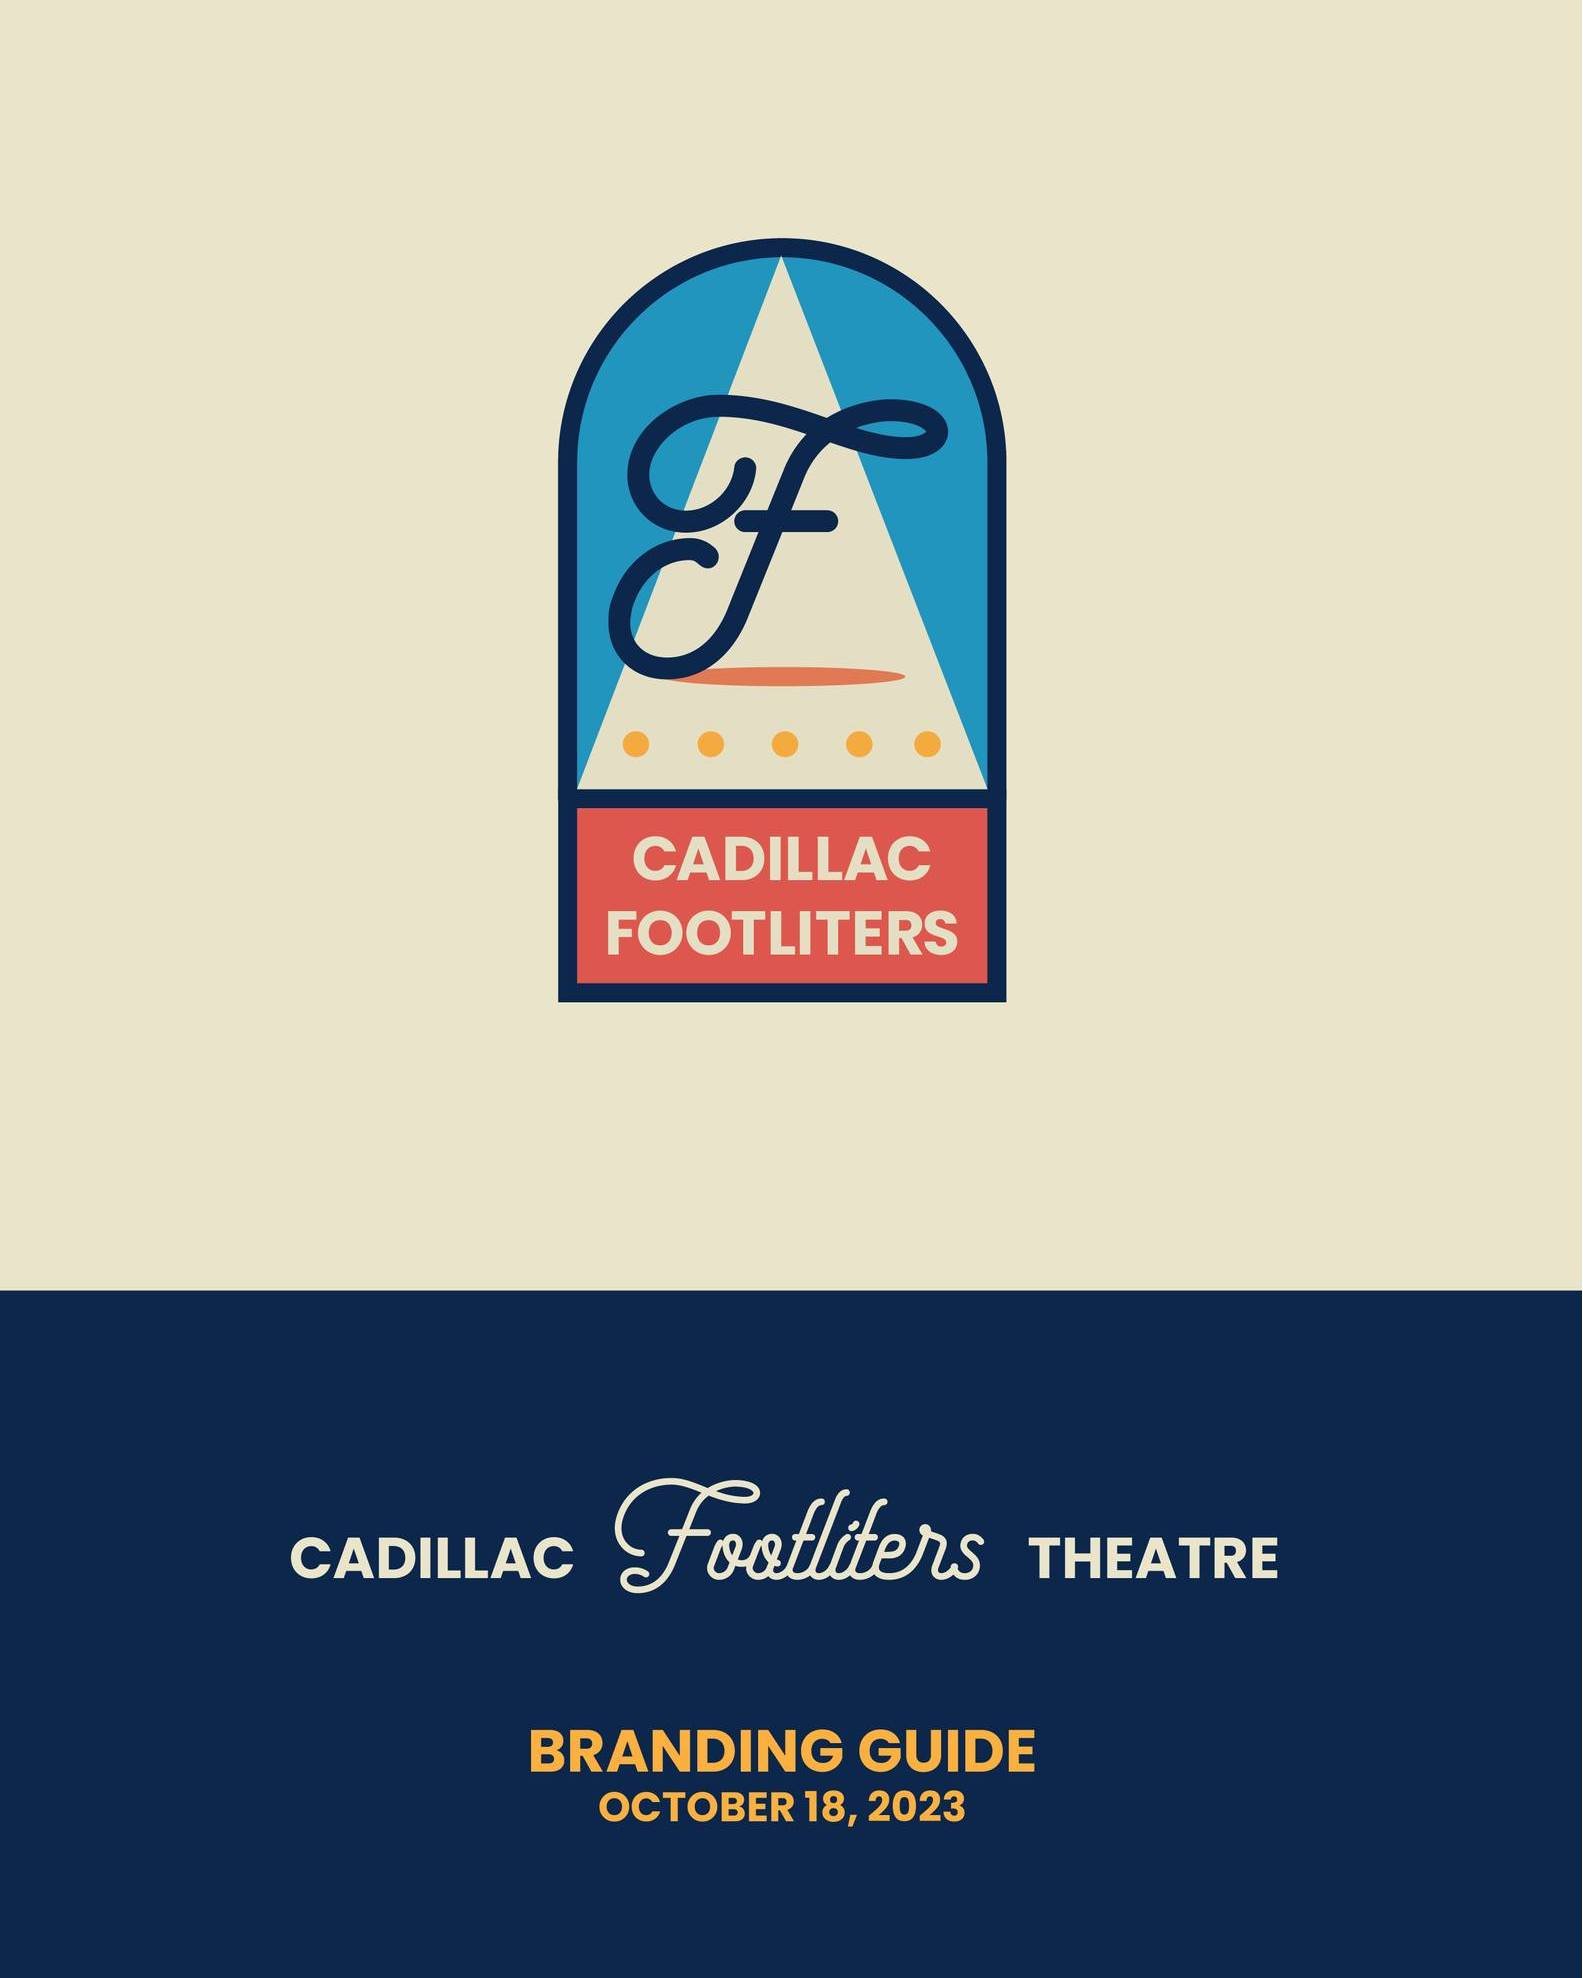 Last year I got a really fun opportunity with Cadillac's local theatre group giving them a rebrand! I updated the @cadillacfootliters logo in 2016, based on a logo they had used for many years up until then. 

Last year rolled around and the group wa